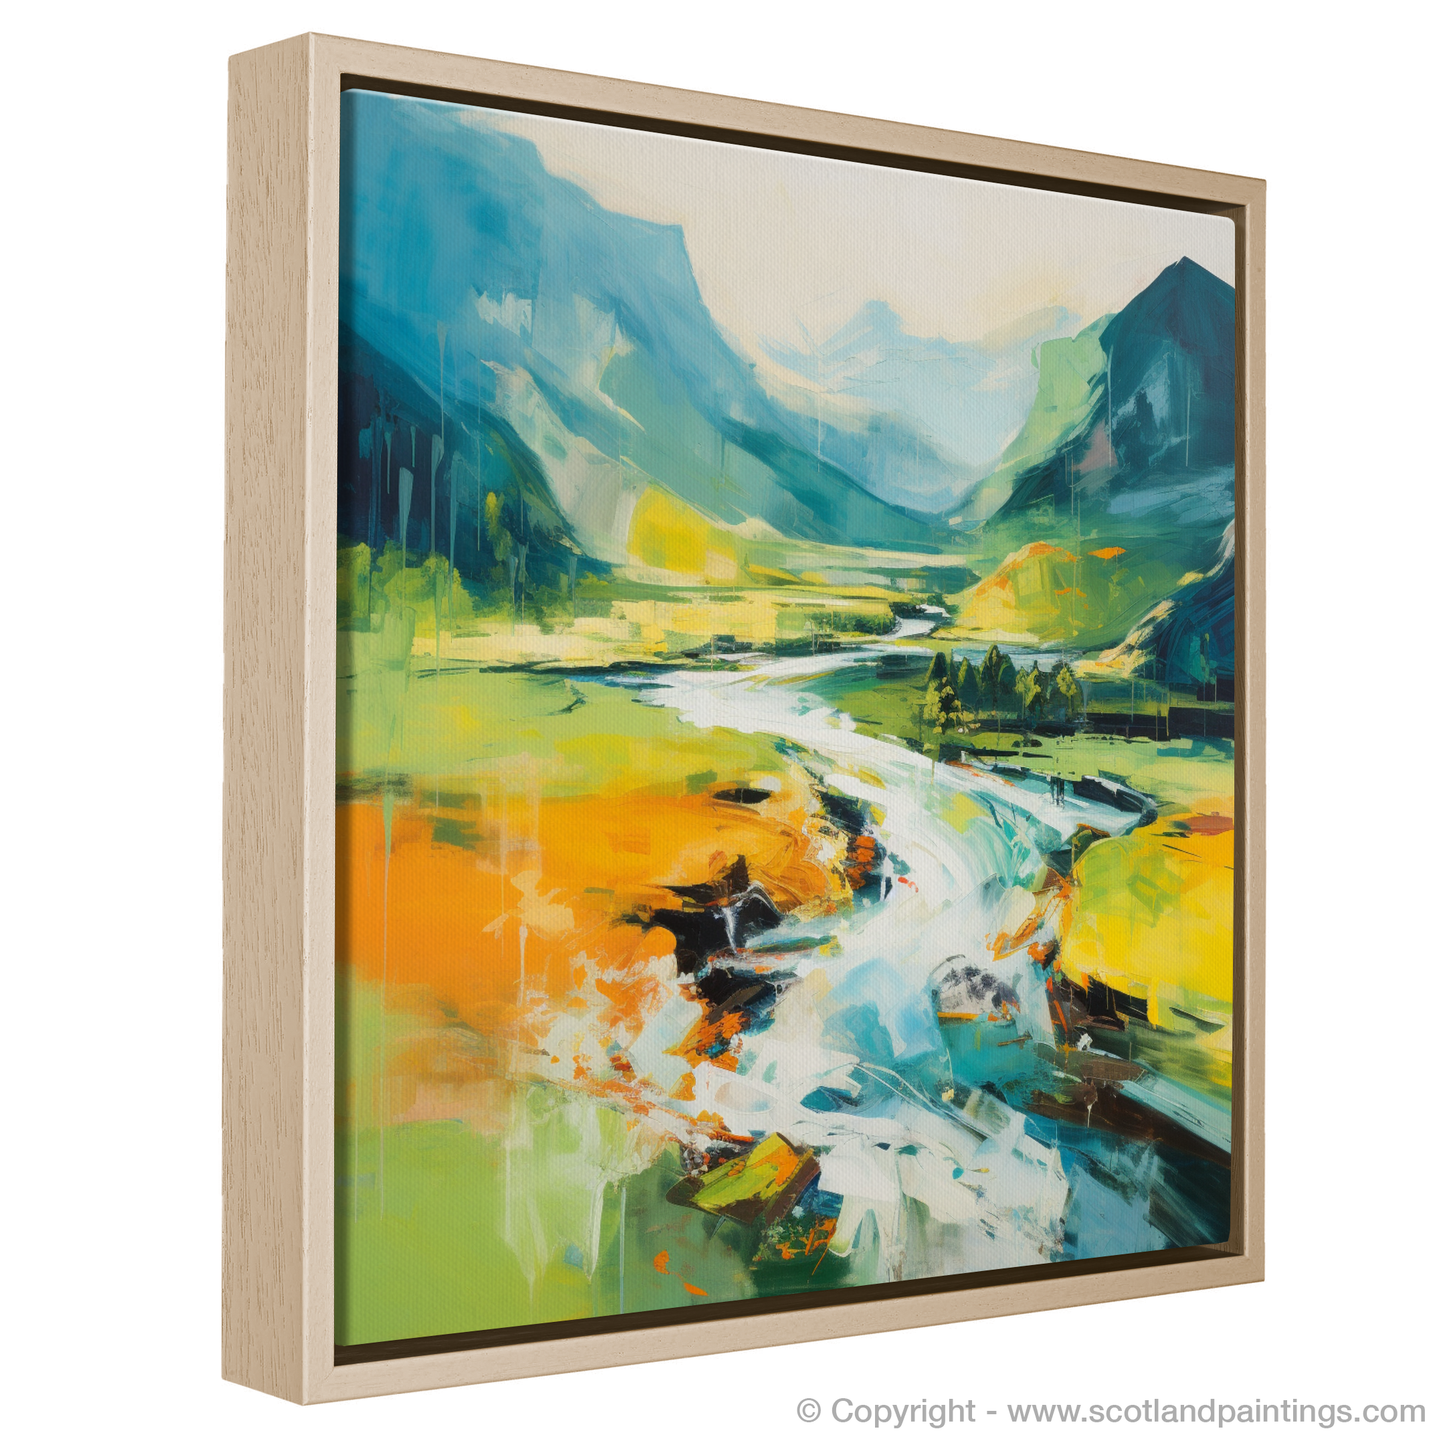 Painting and Art Print of River Garry, Highlands in summer entitled "Summer Rhapsody: An Abstract Homage to River Garry and the Highlands".